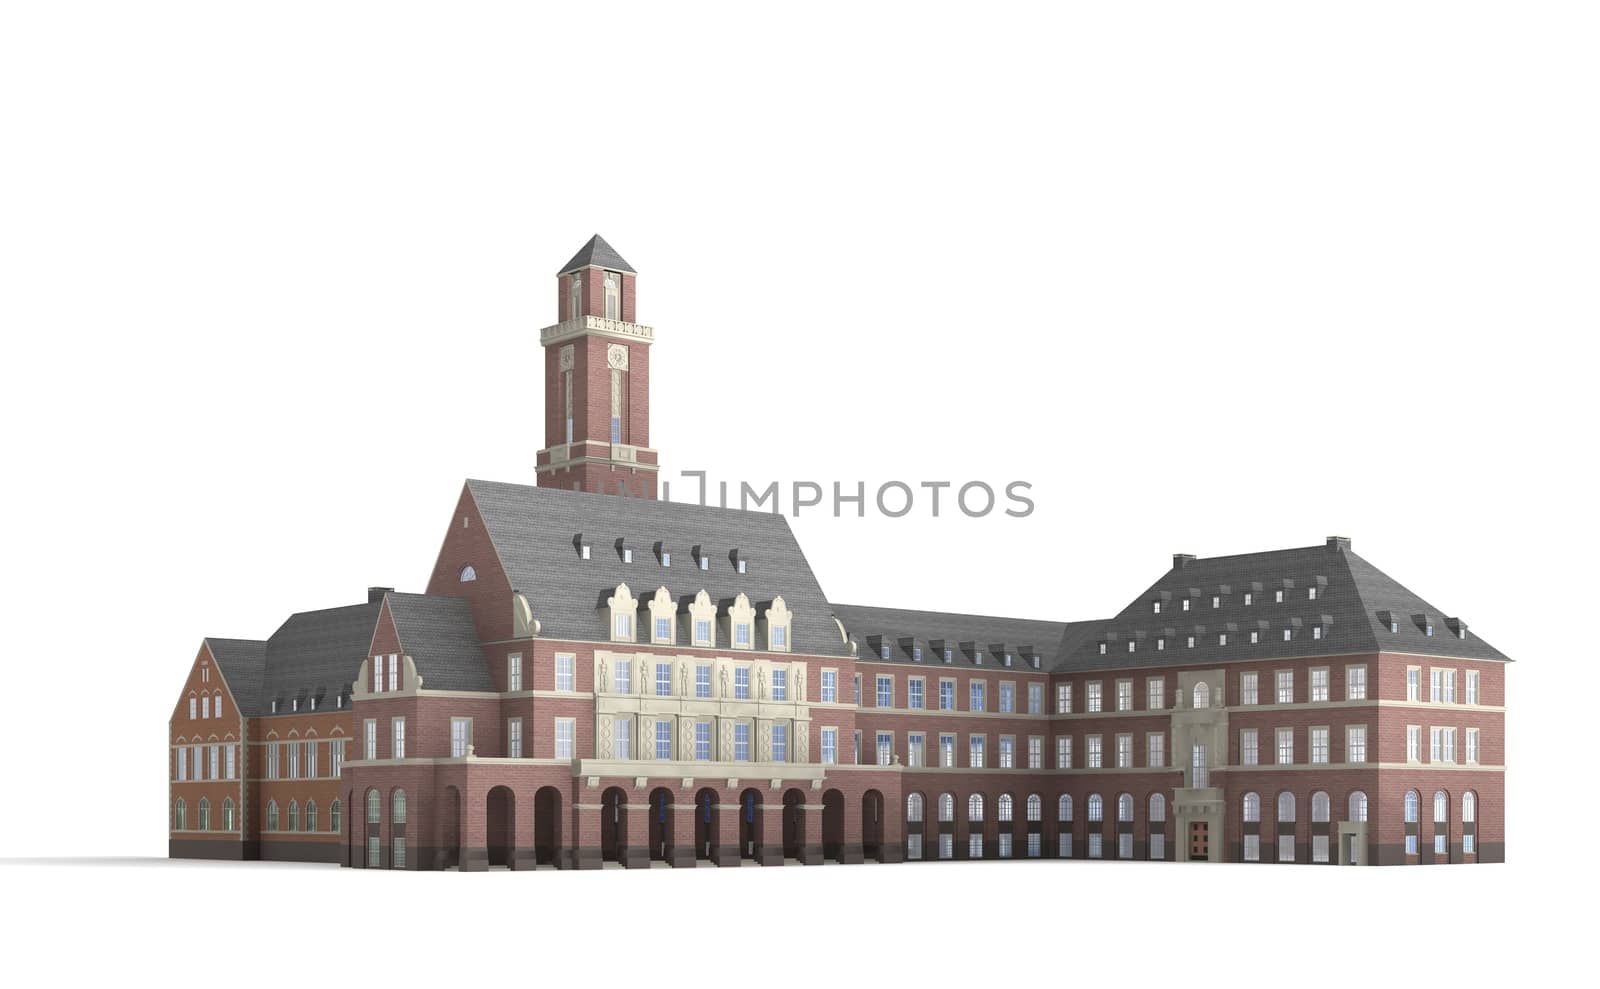 The Bottrop town hall from 1918 is considered as one of the finest in the Ruhr.